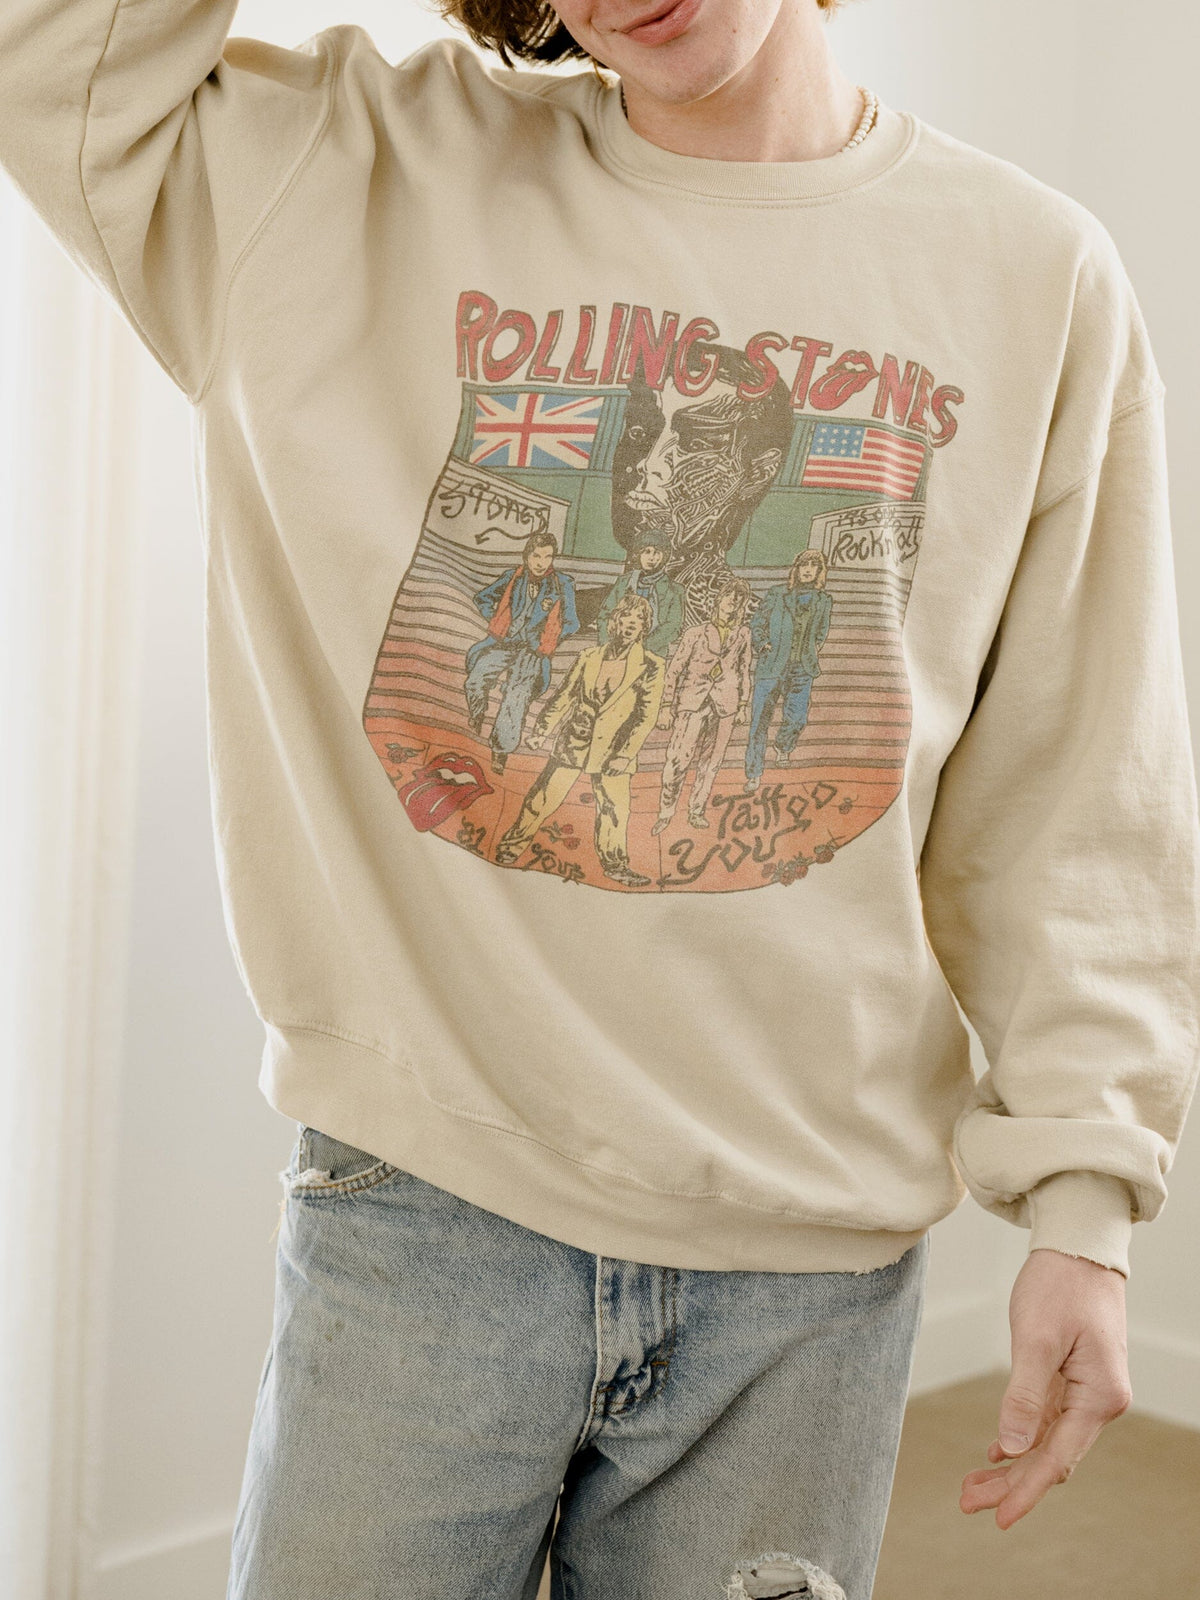 Rolling Stones Tattoo You Sand Thrifted Sweatshirt